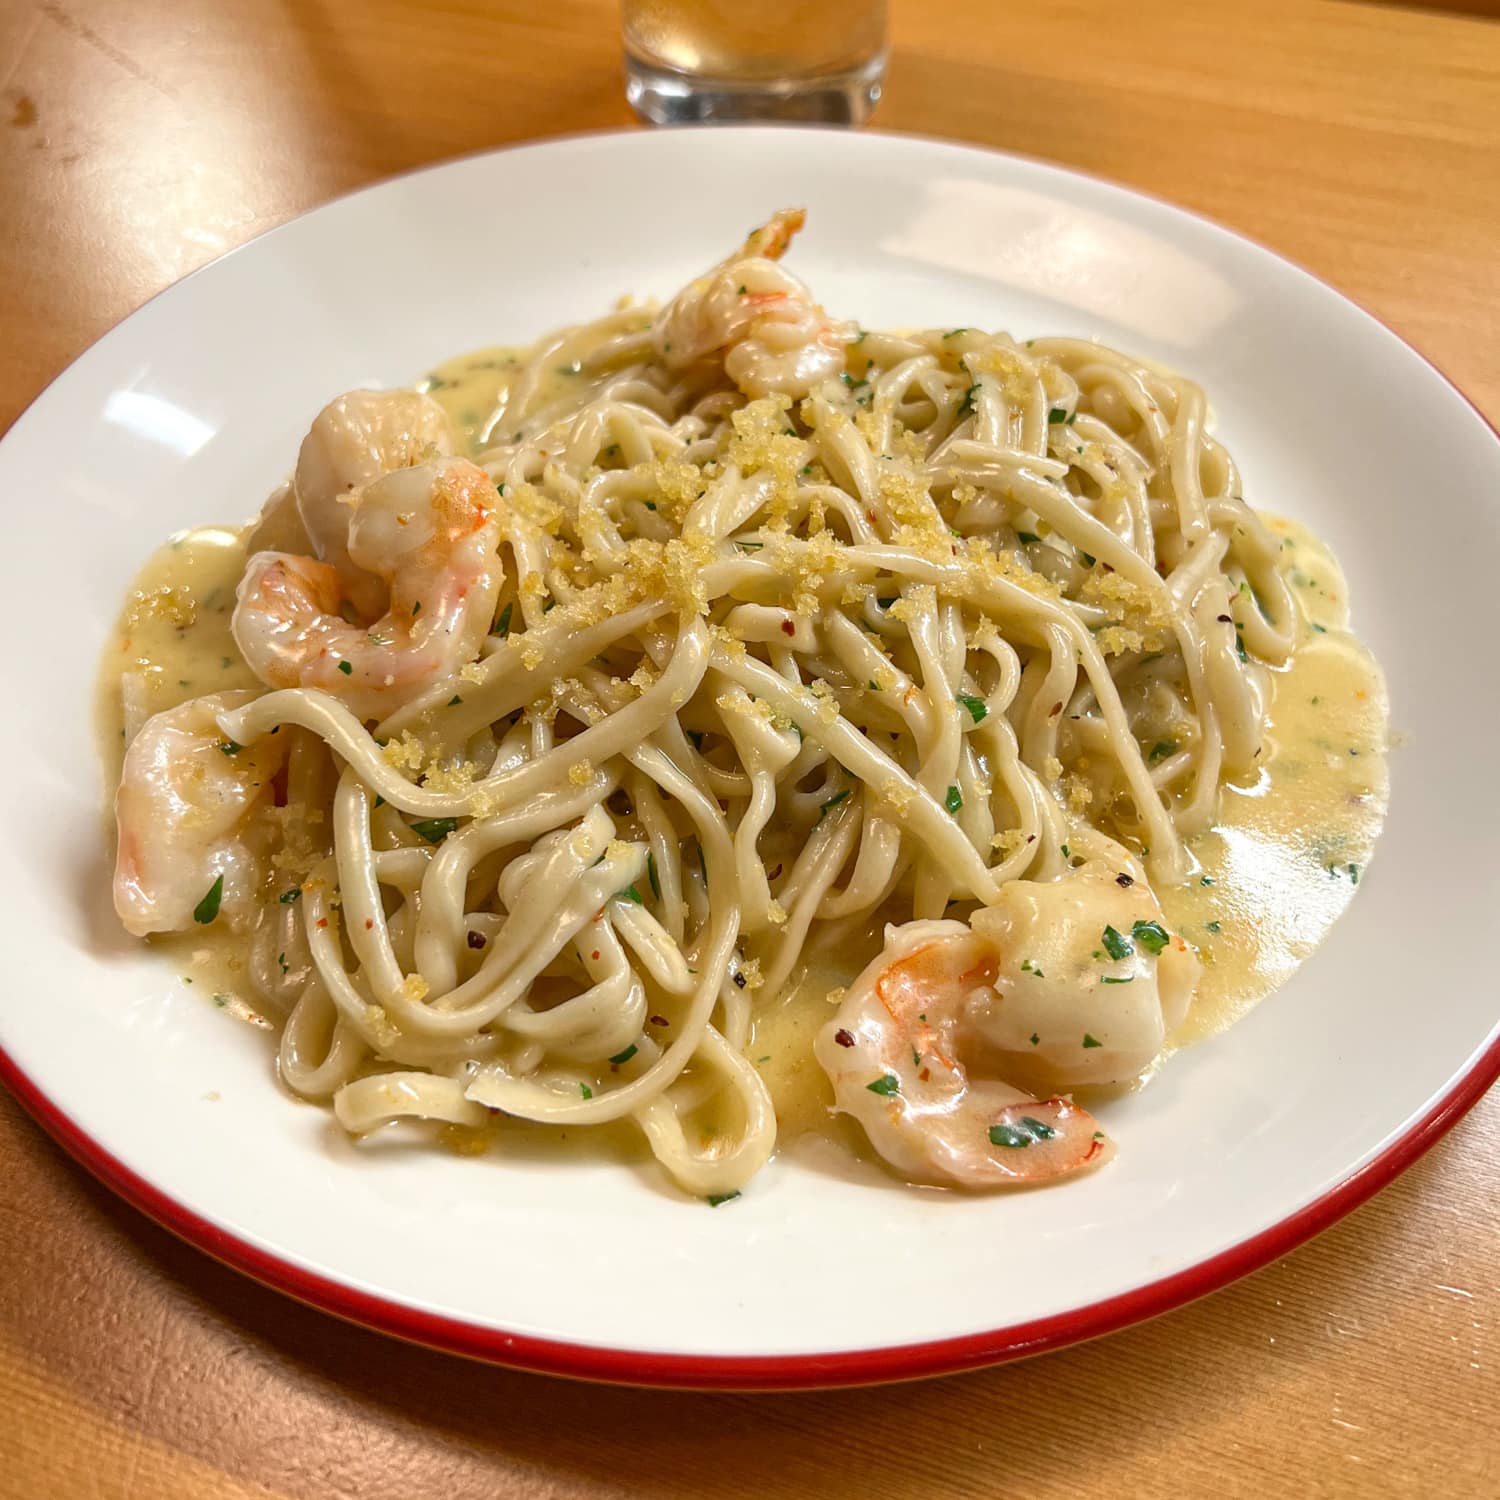 Shrimp scampi at Birdie's, one of the best East Austin restaurants to open in recent years.